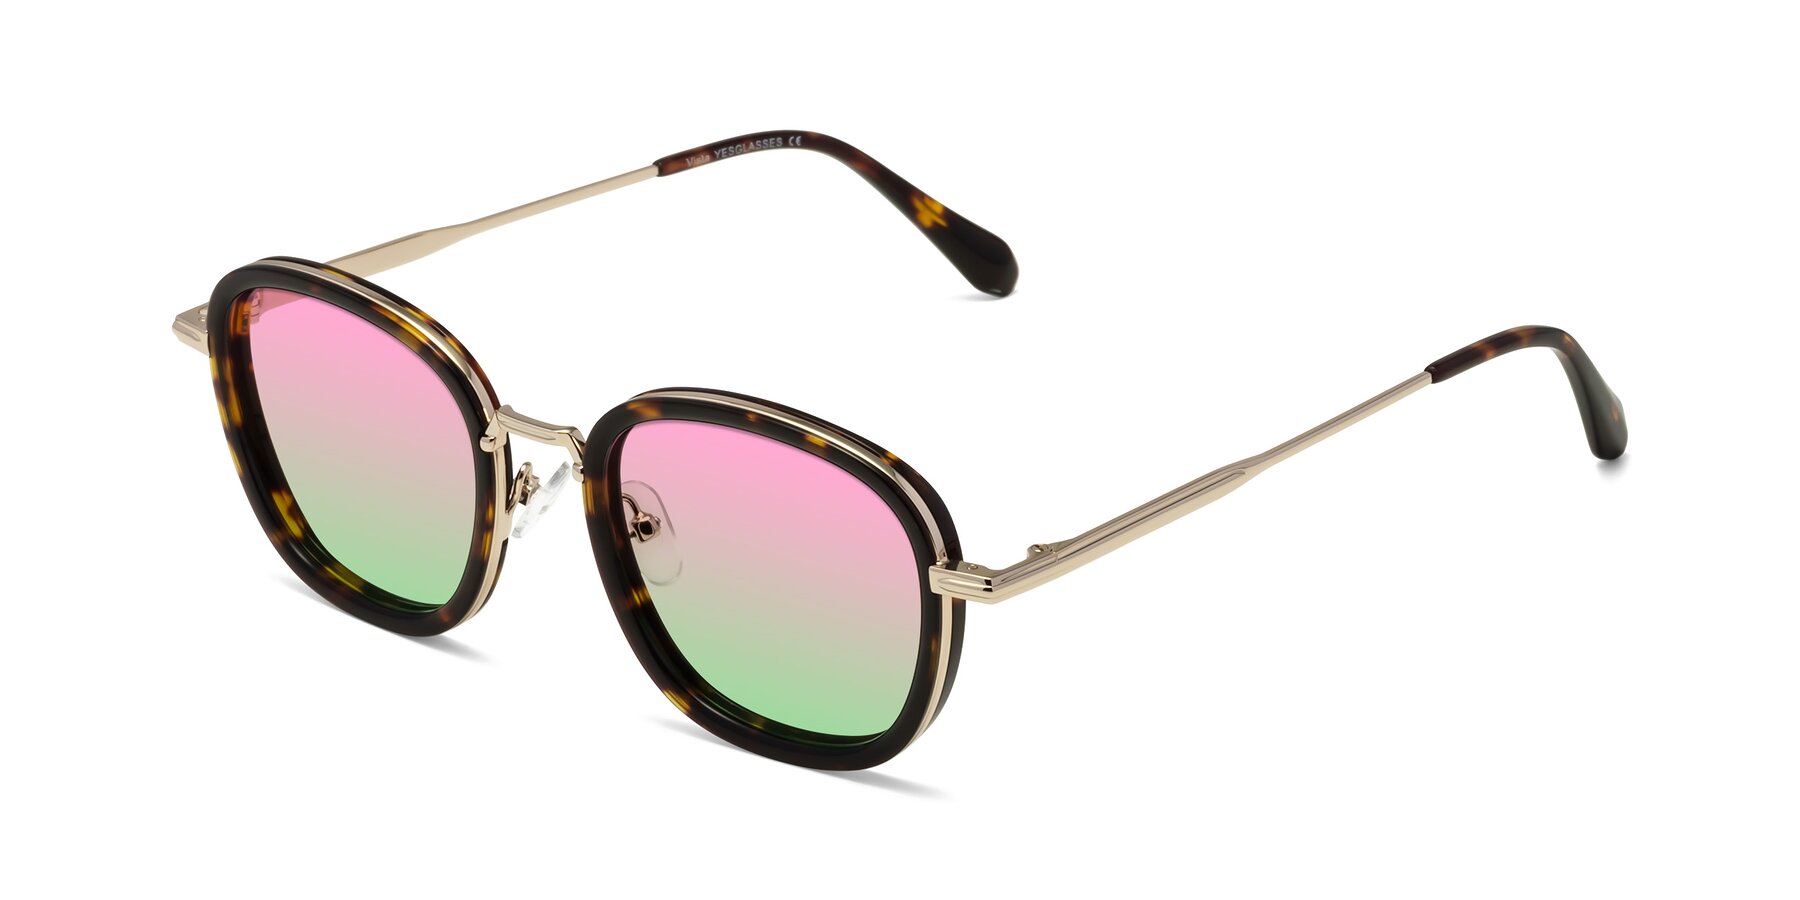 Angle of Vista in Tortoise-Light Gold with Pink / Green Gradient Lenses